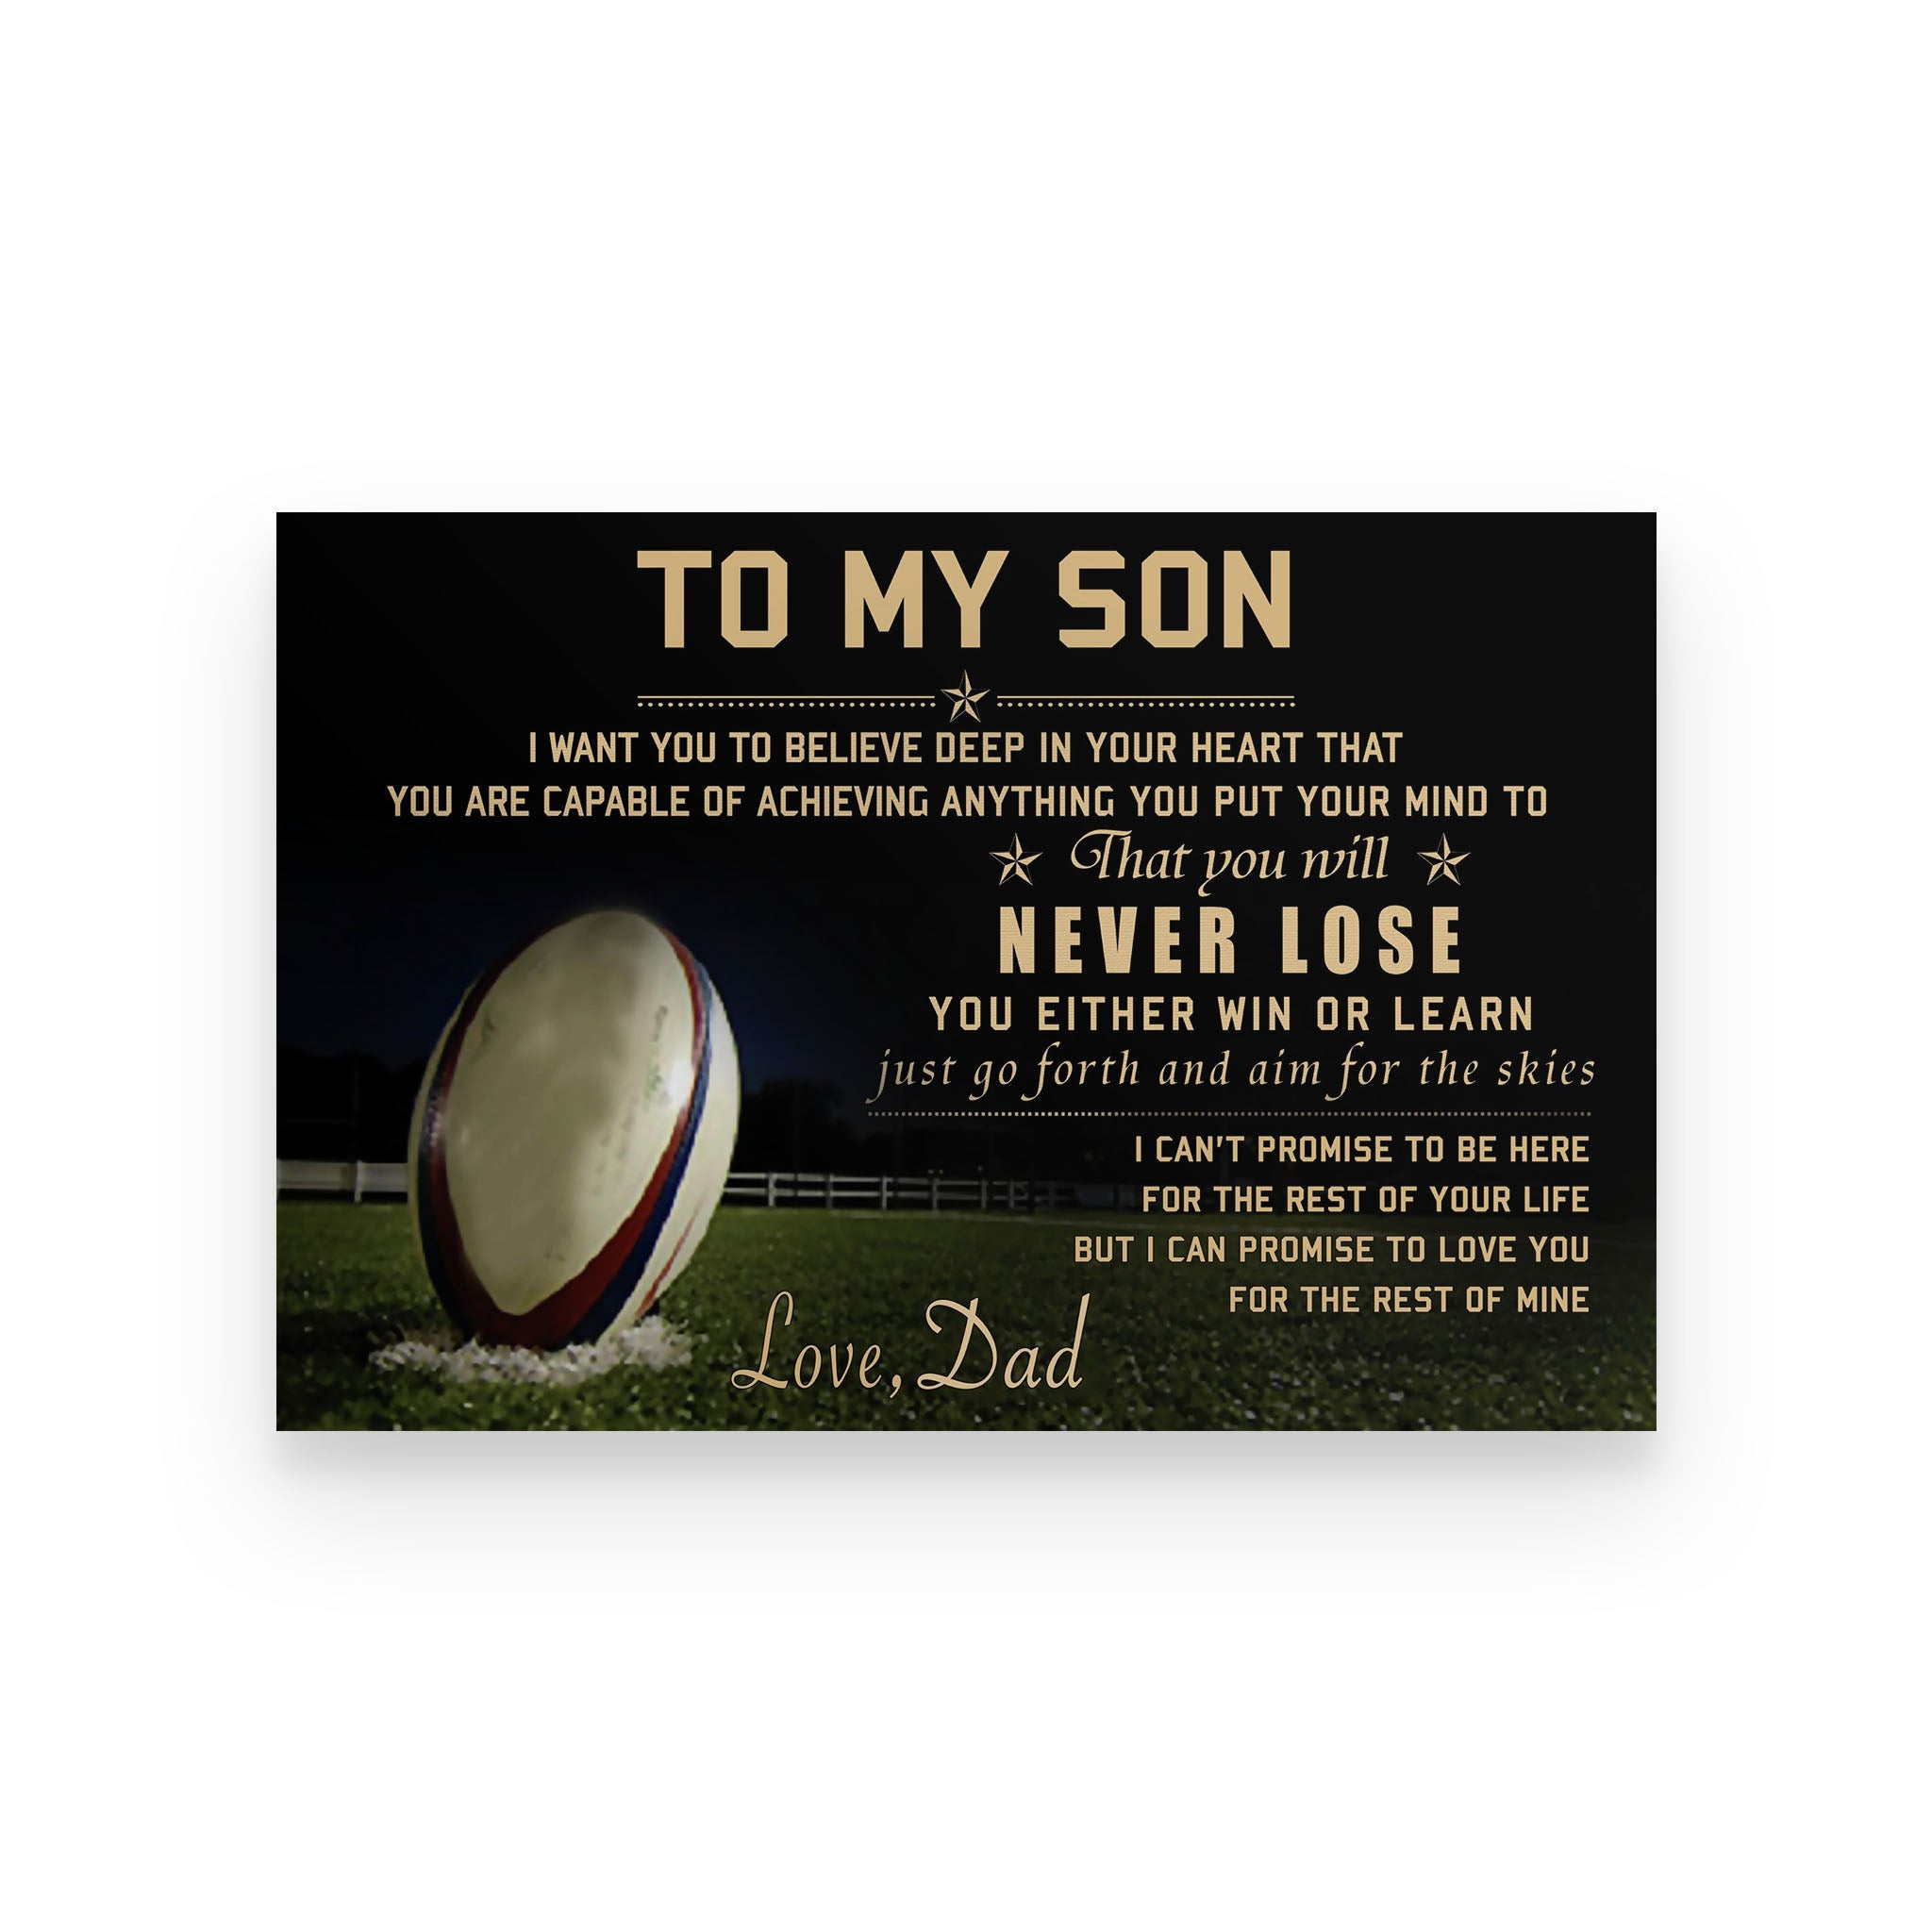 Autralia football poster dad to son I want you to believe deep in your heart vs7